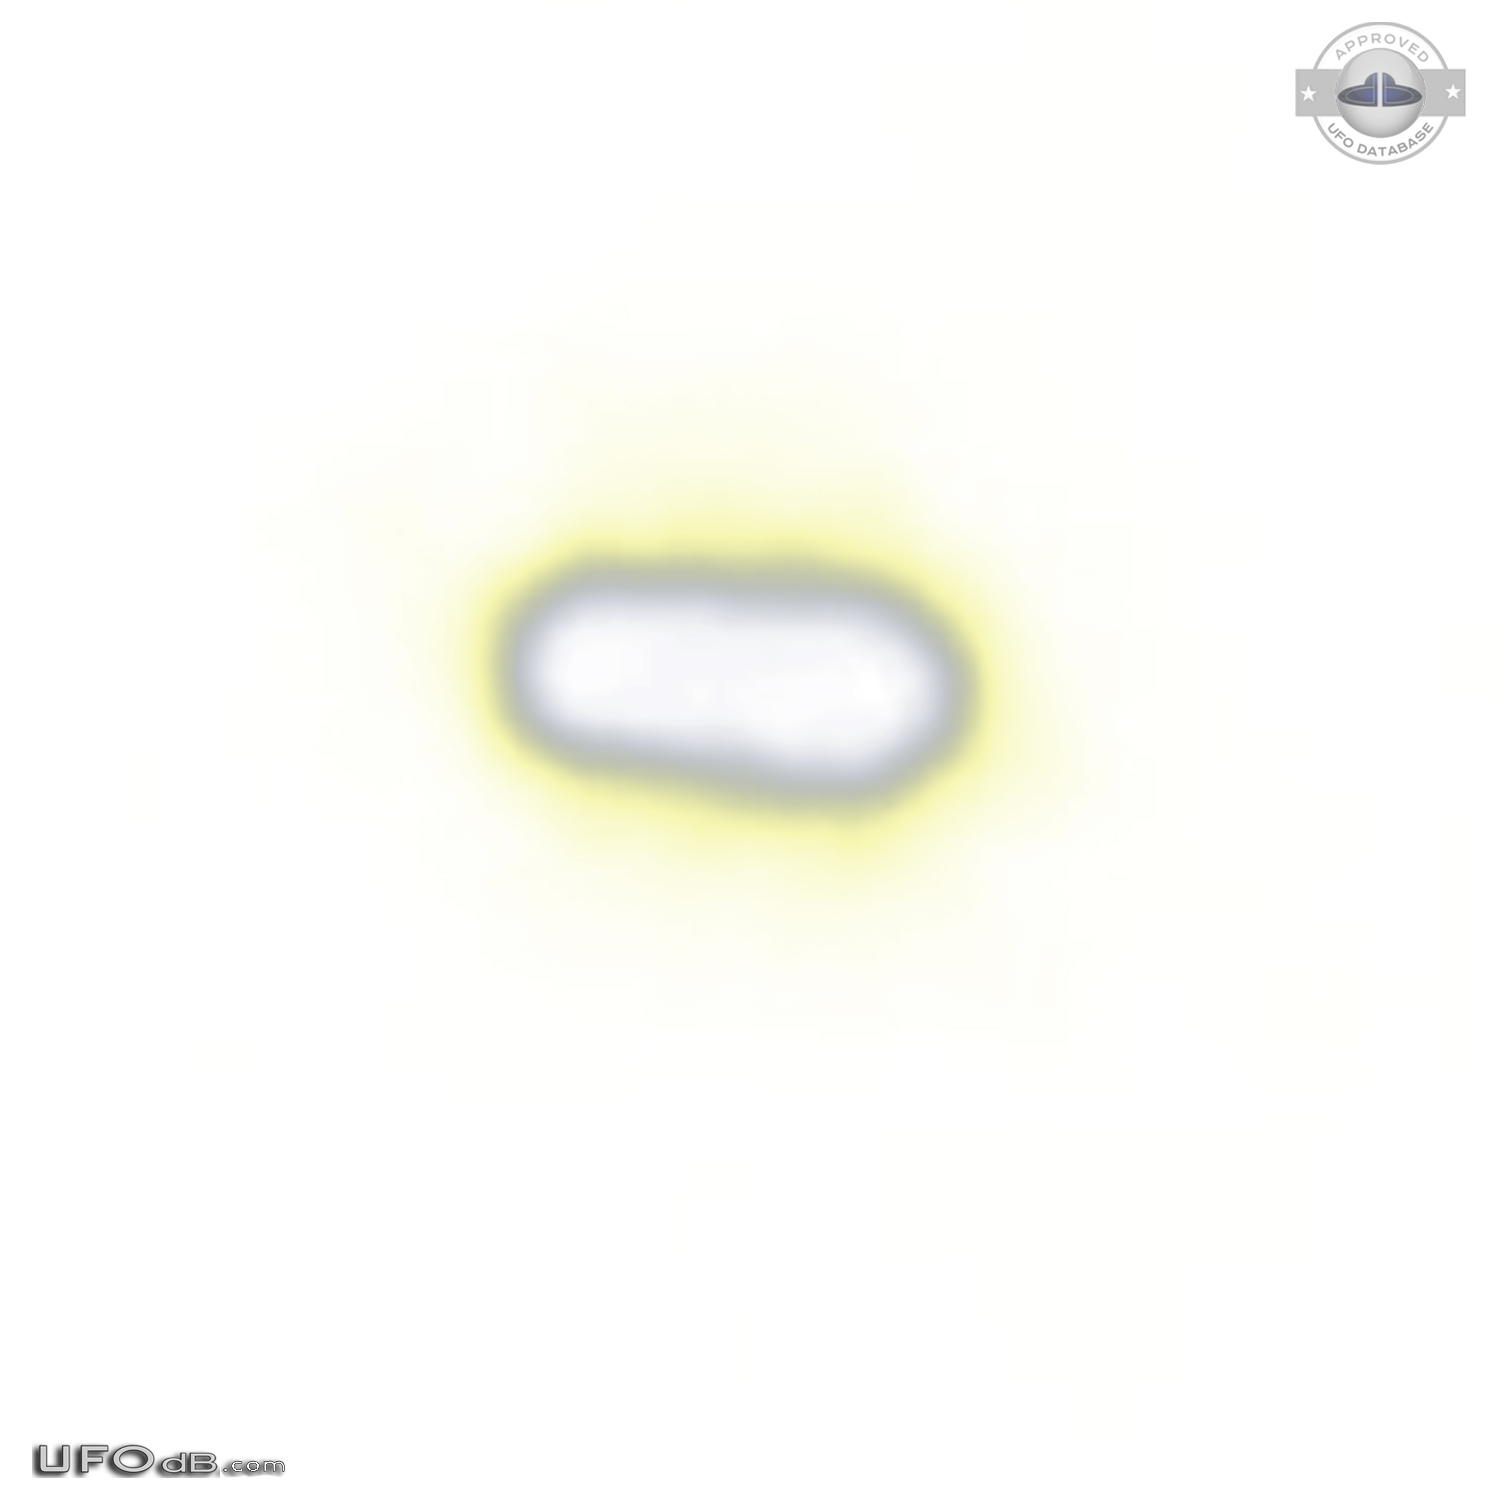 Oval UFO like a star but it disappeared - Bergen New York USA 2015 UFO Picture #731-5